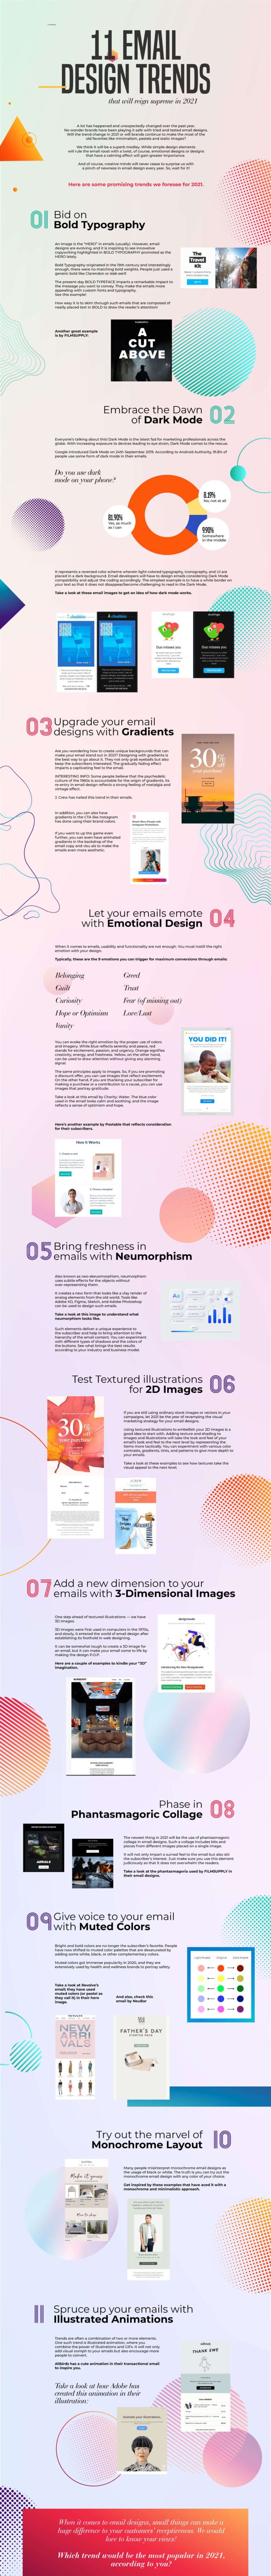 Email Design Trends 2021: A Mixed Bag of Old and New – [Infographic]